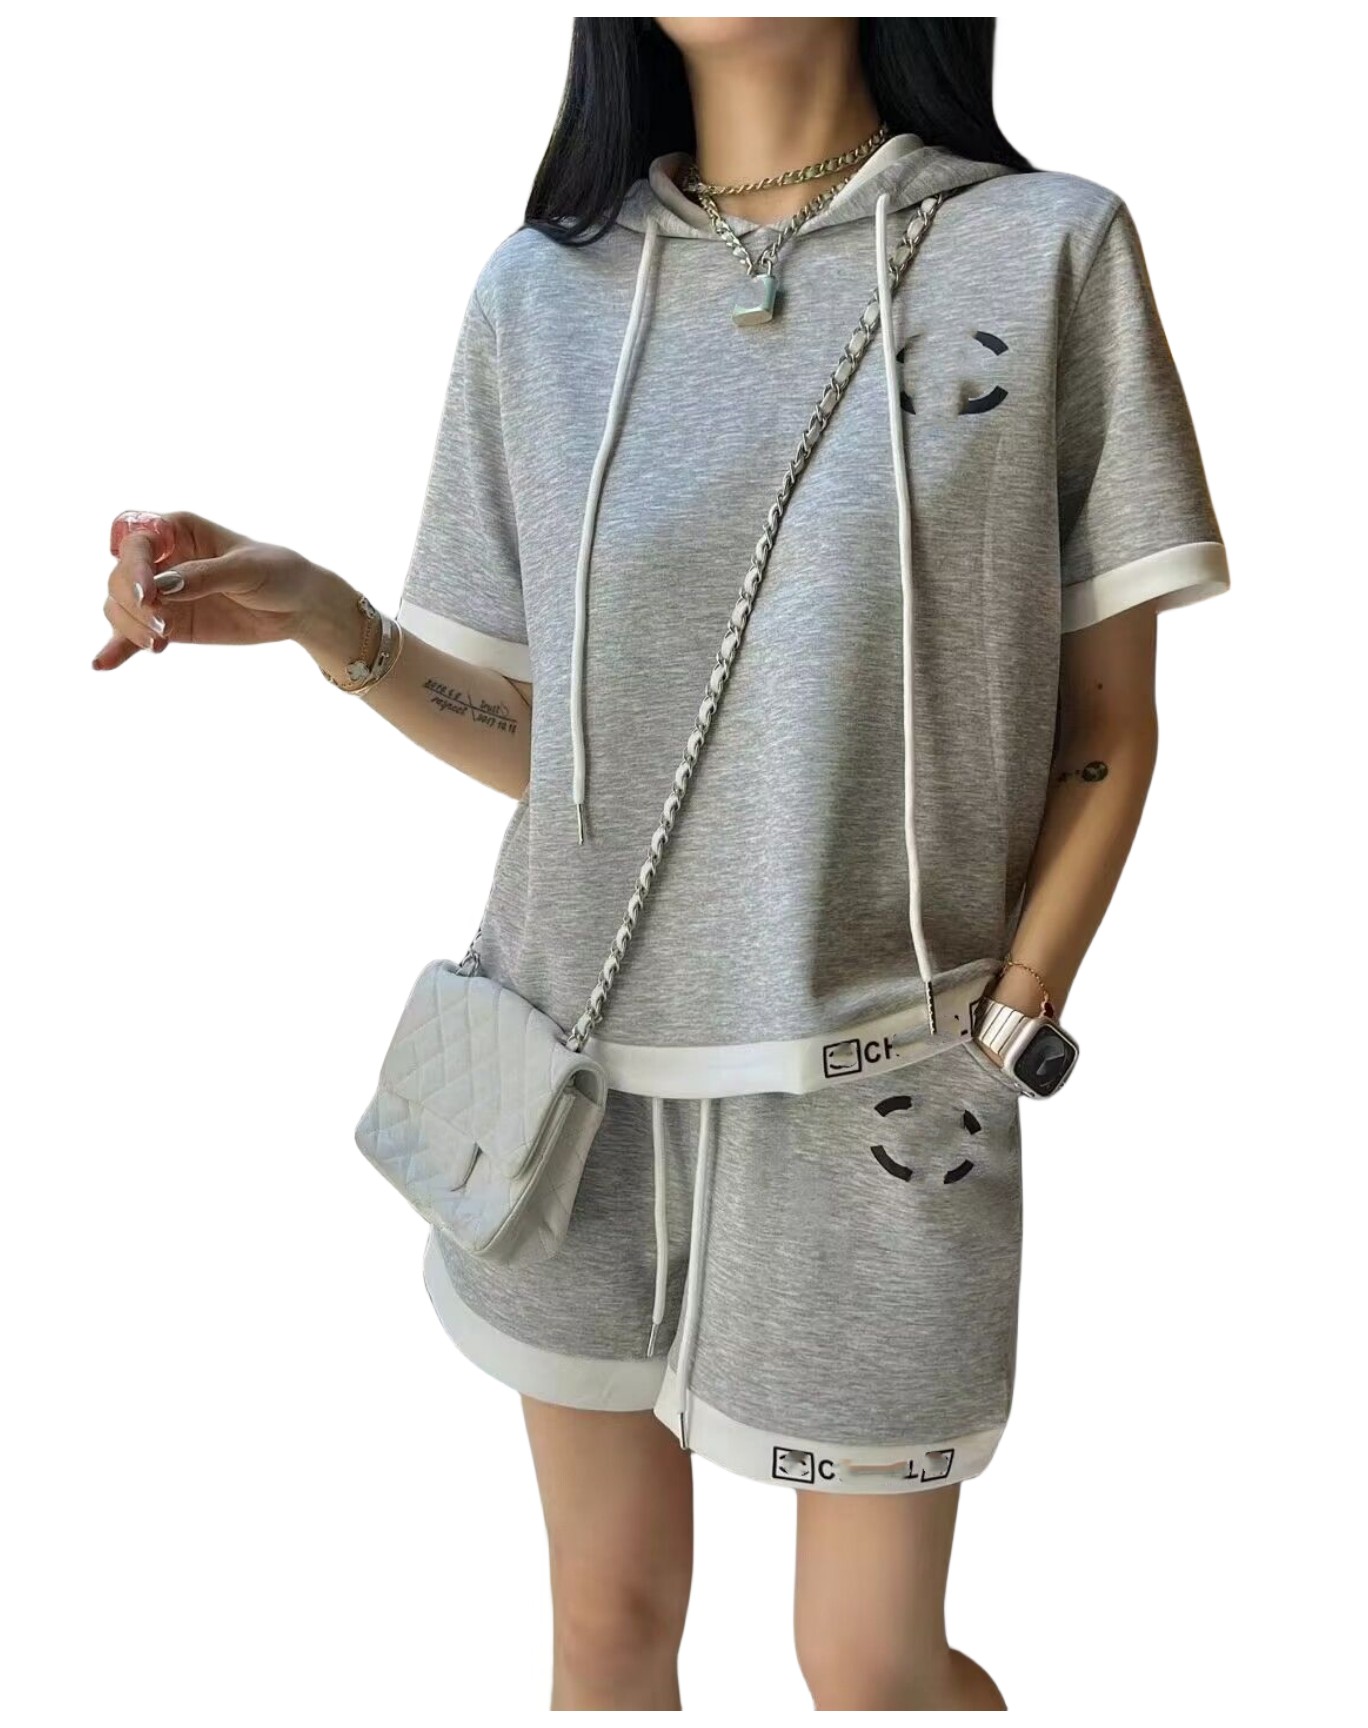 New Design women's hooded logo letter embroidery loose short sleeve sweatshirt and shorts twinset tracksuit SML